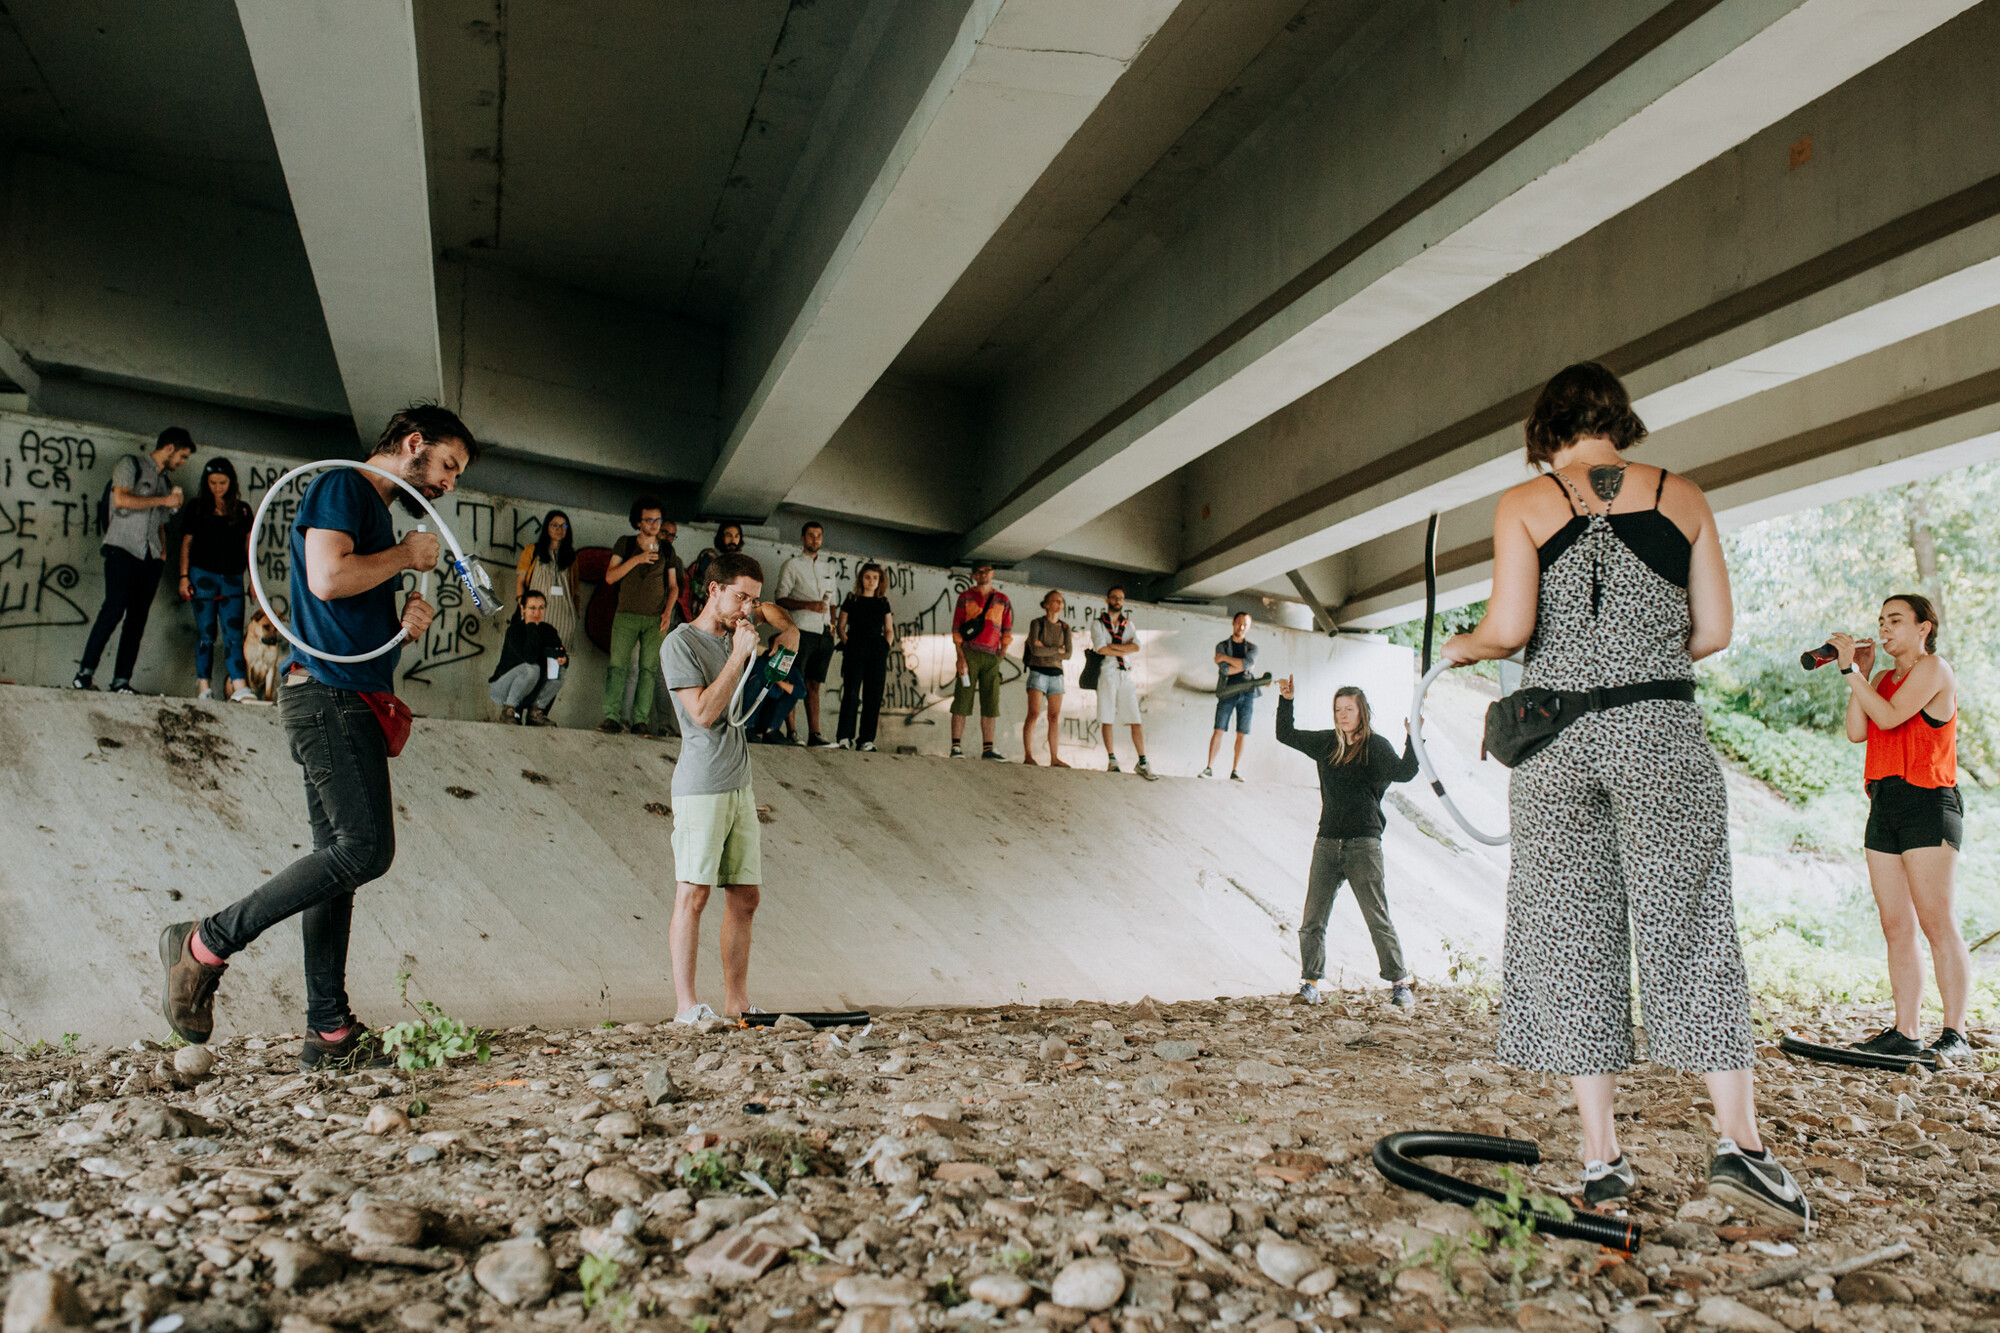 Five people stand in a circle under a bridge with an audience standing above them.